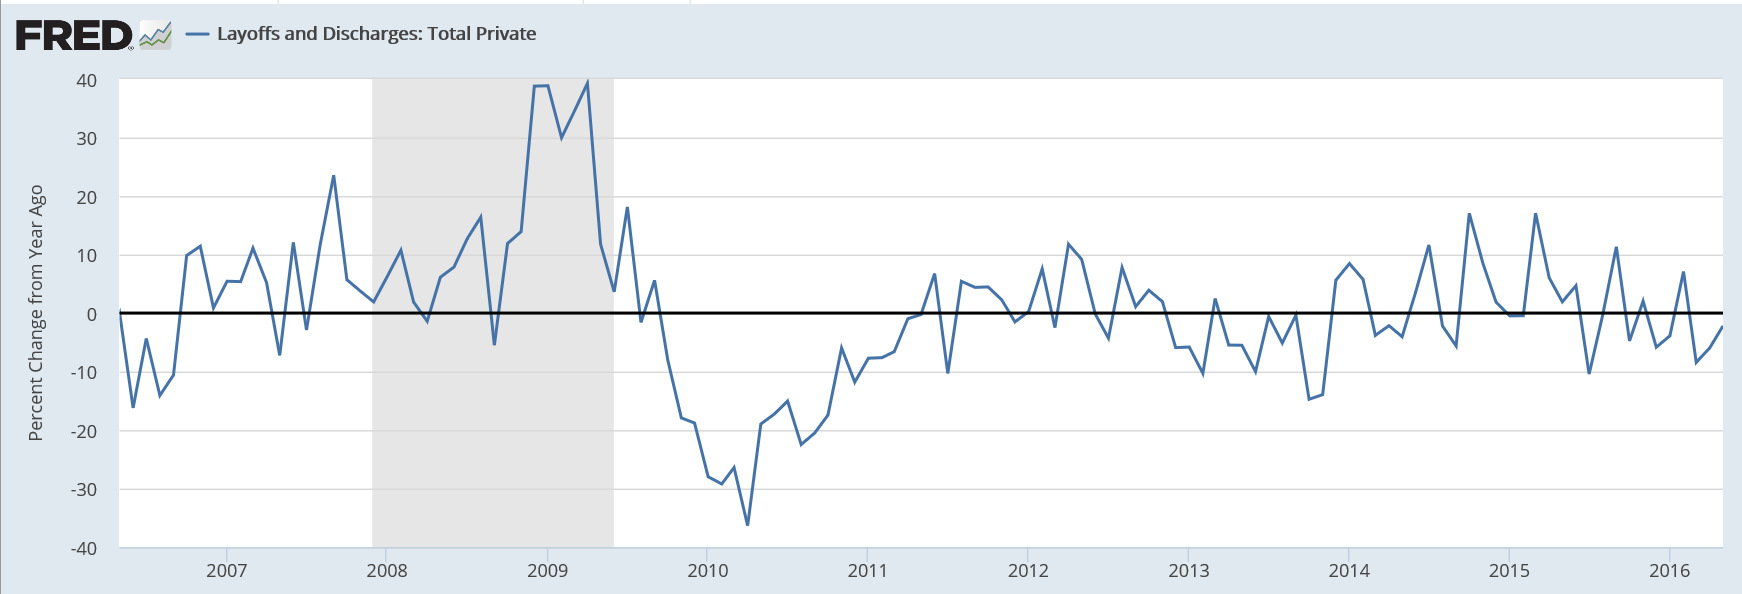 Real final domestic demand, Layoffs, Fed tax receipts, Factory orders